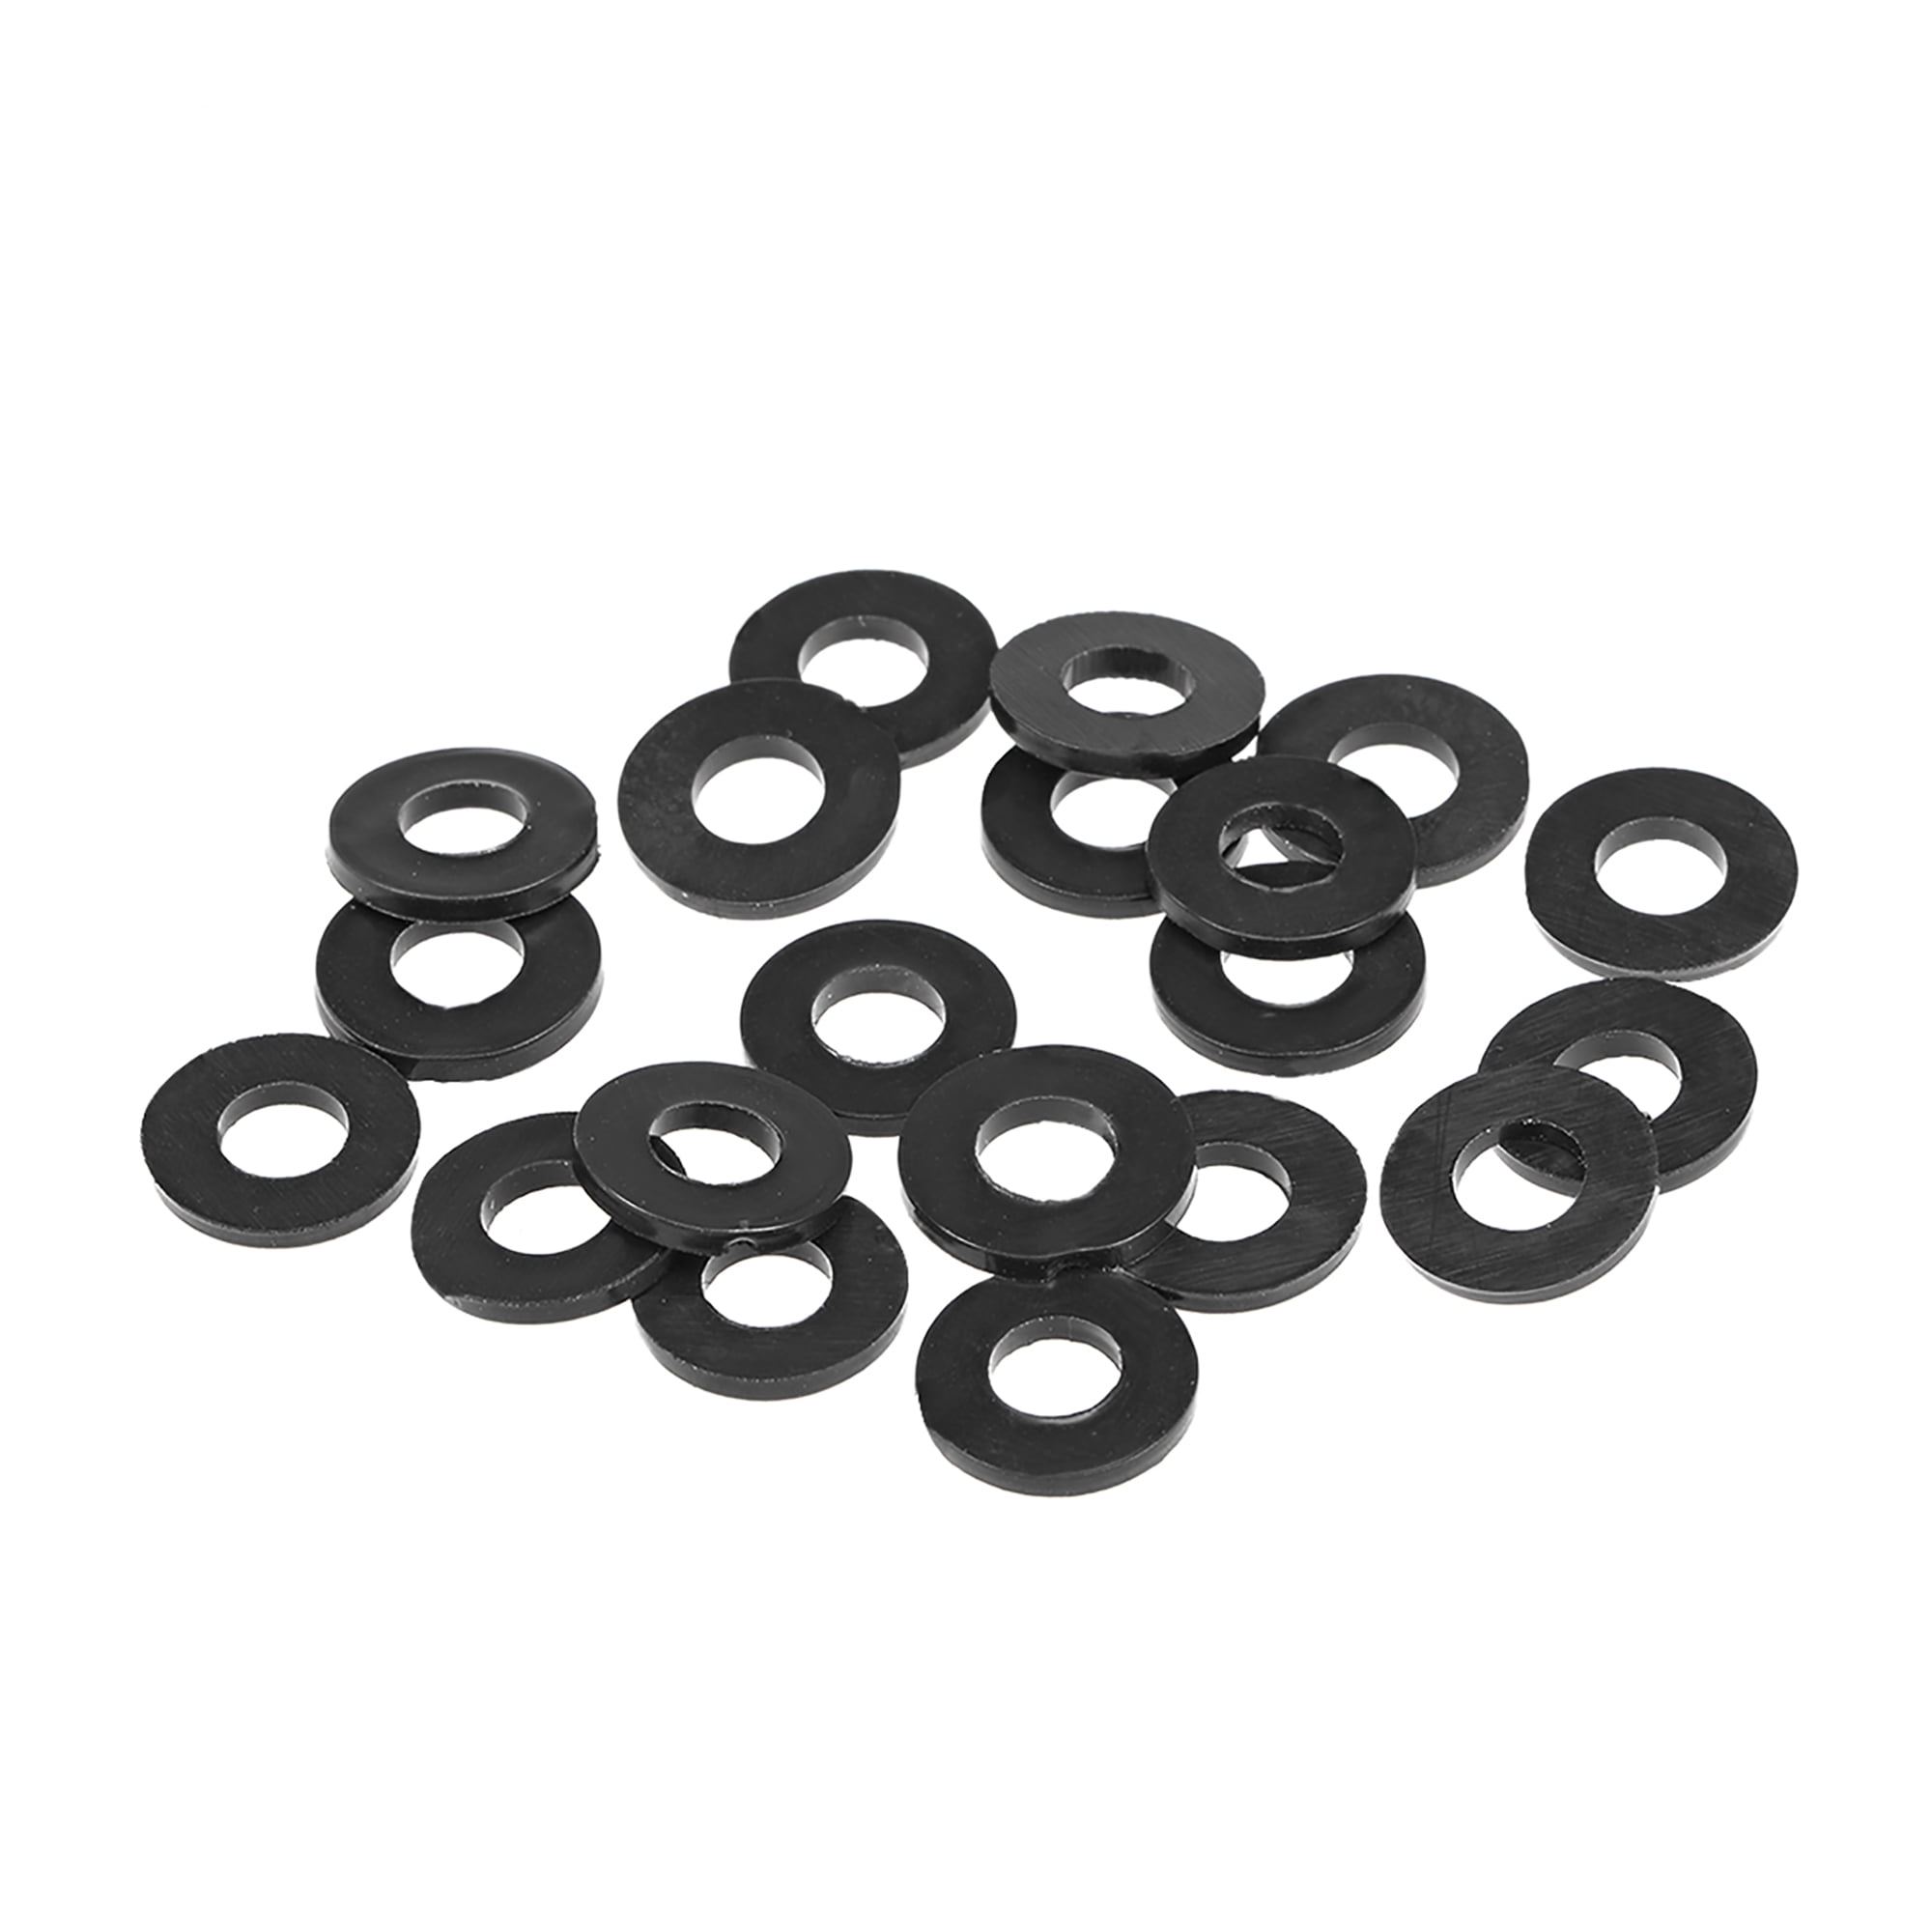 WSHR-87770 5pcs M50 Ultra-Thin Flat Washers Gaskets Aluminum Washer Gasket 58mm-60mm Outer Dia 1.2mm-2mm Thickness Inner Dia: M50x58mmx1.2mm